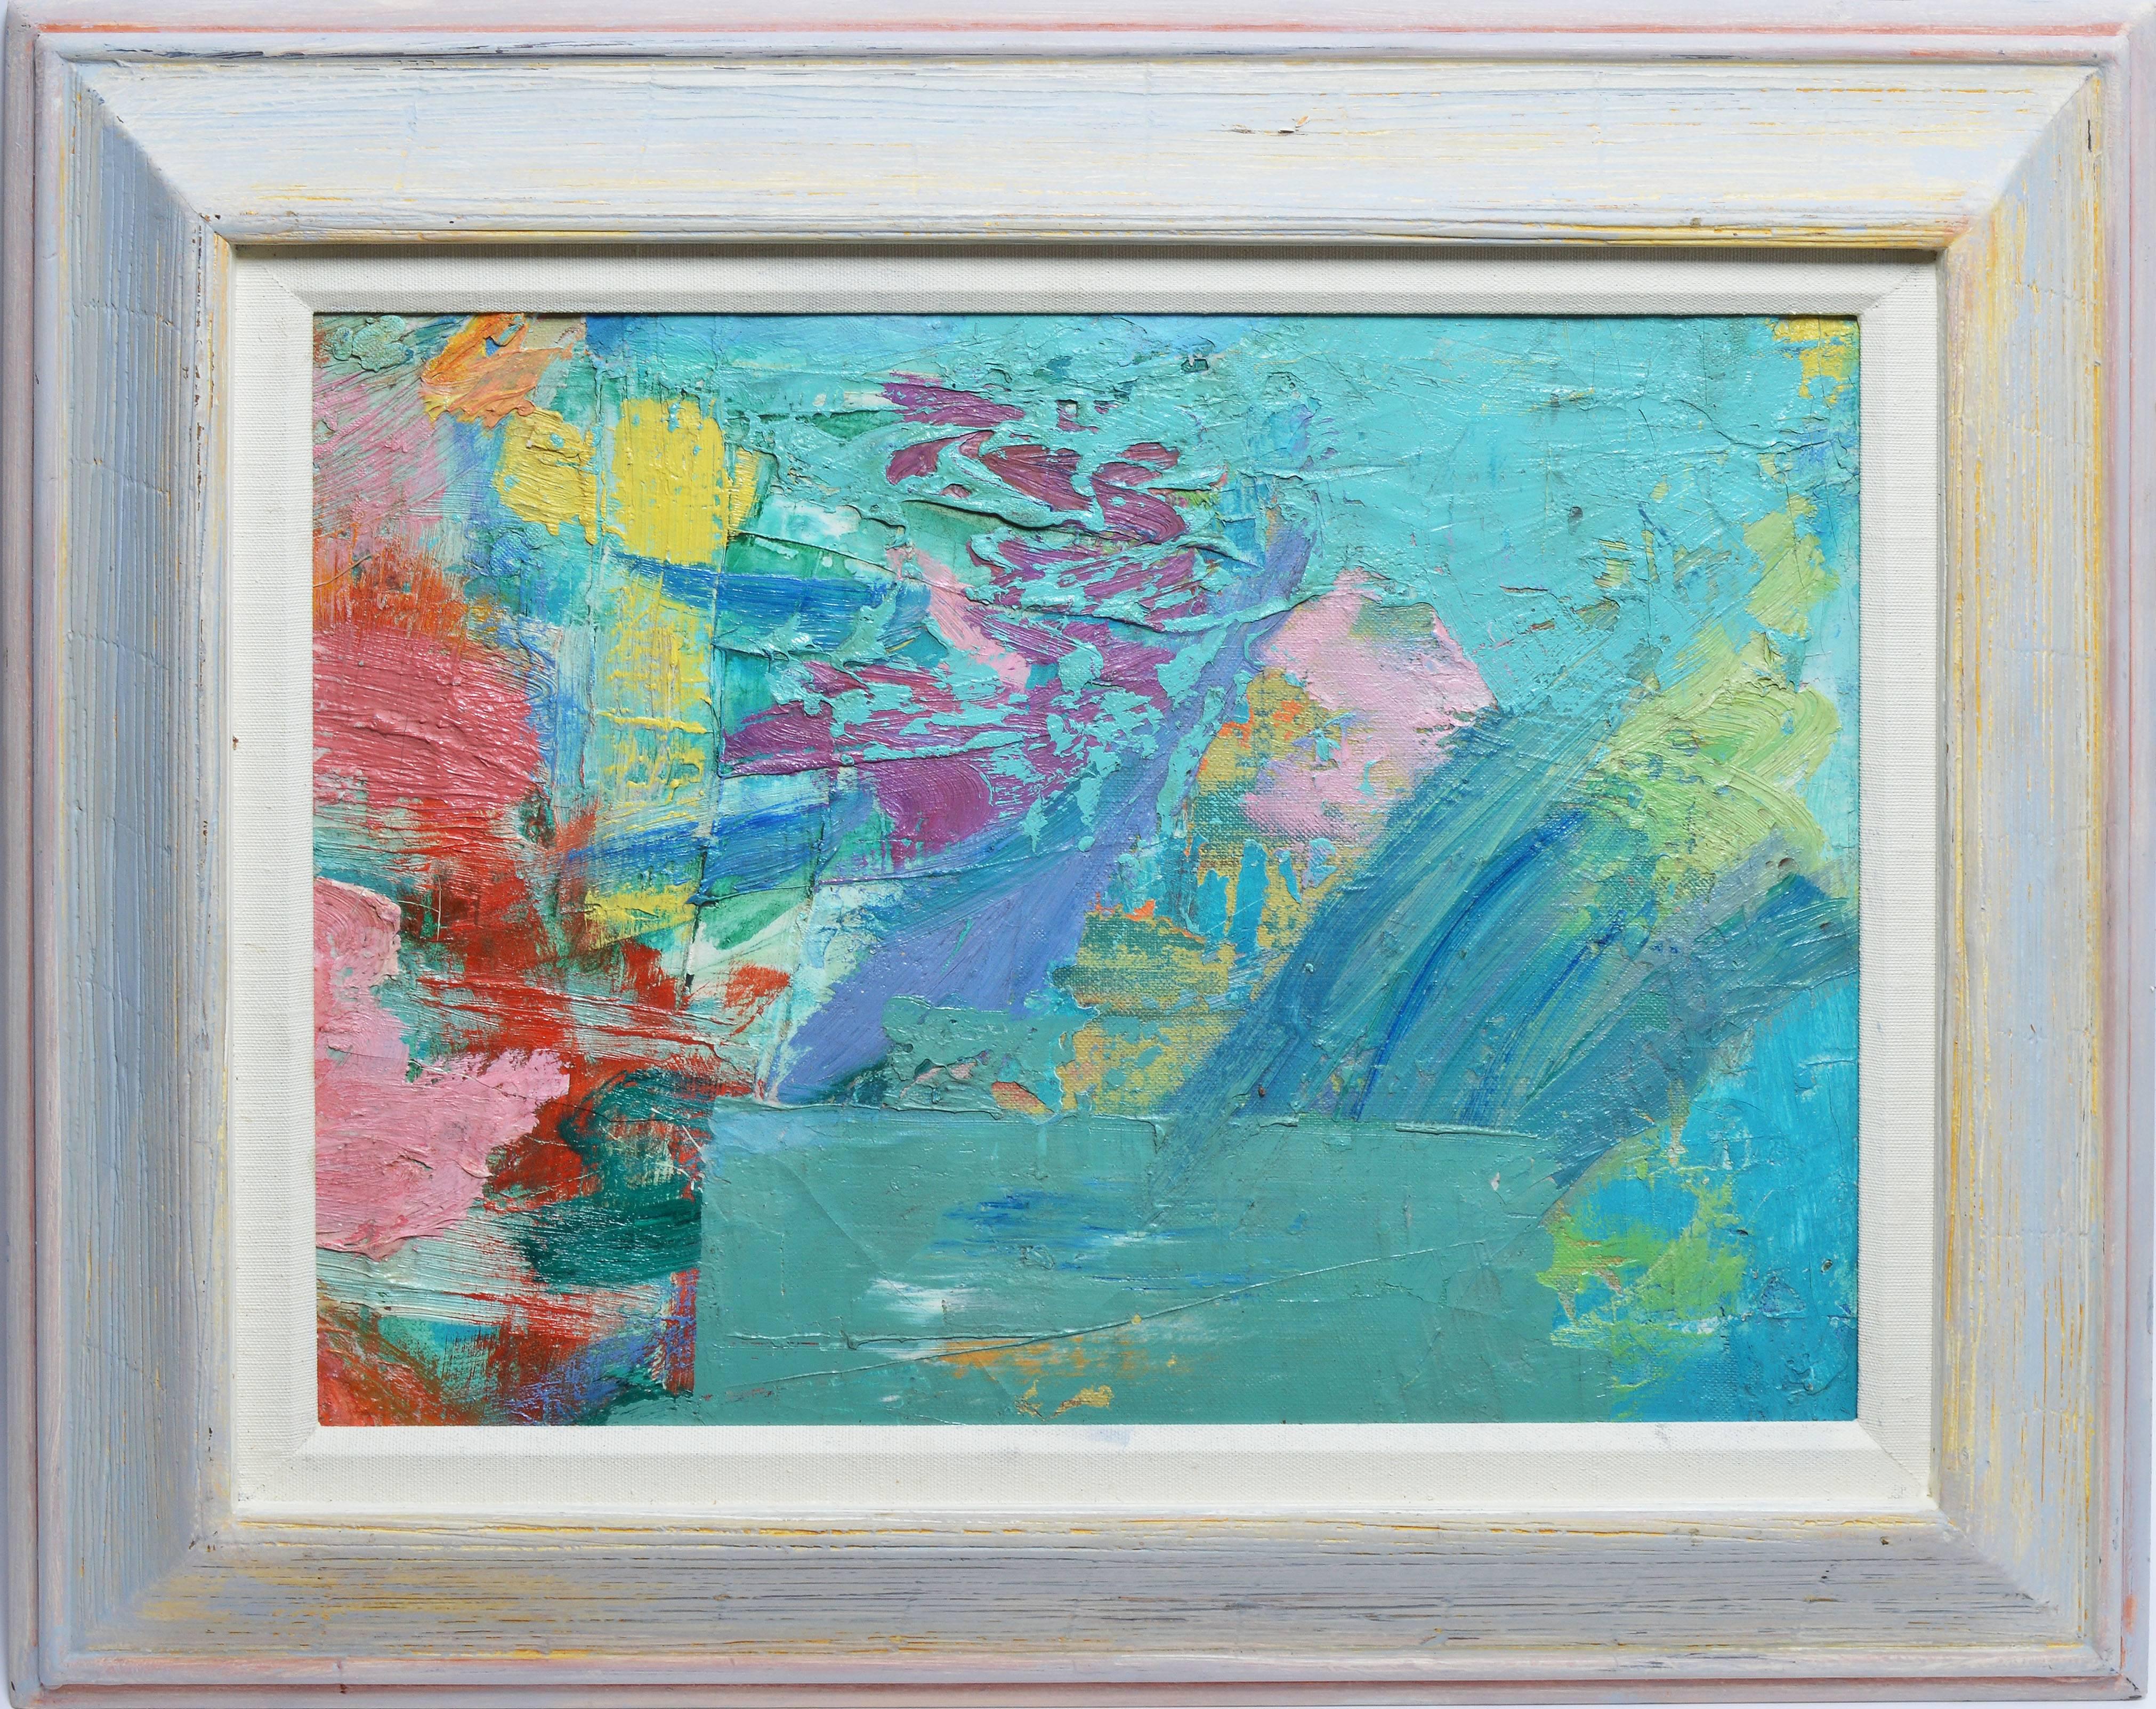 Modernist abstract landscape painting by Morris Shulman (1912-1978).  Oil on board, circa 1940.  Signed on verso, &quot;Morris Shulman&quot;.  Displayed in a period modernist frame.  Image size, 16&quot;L x 12&quot;H, overall 22&quot;L x 18&quot;H.